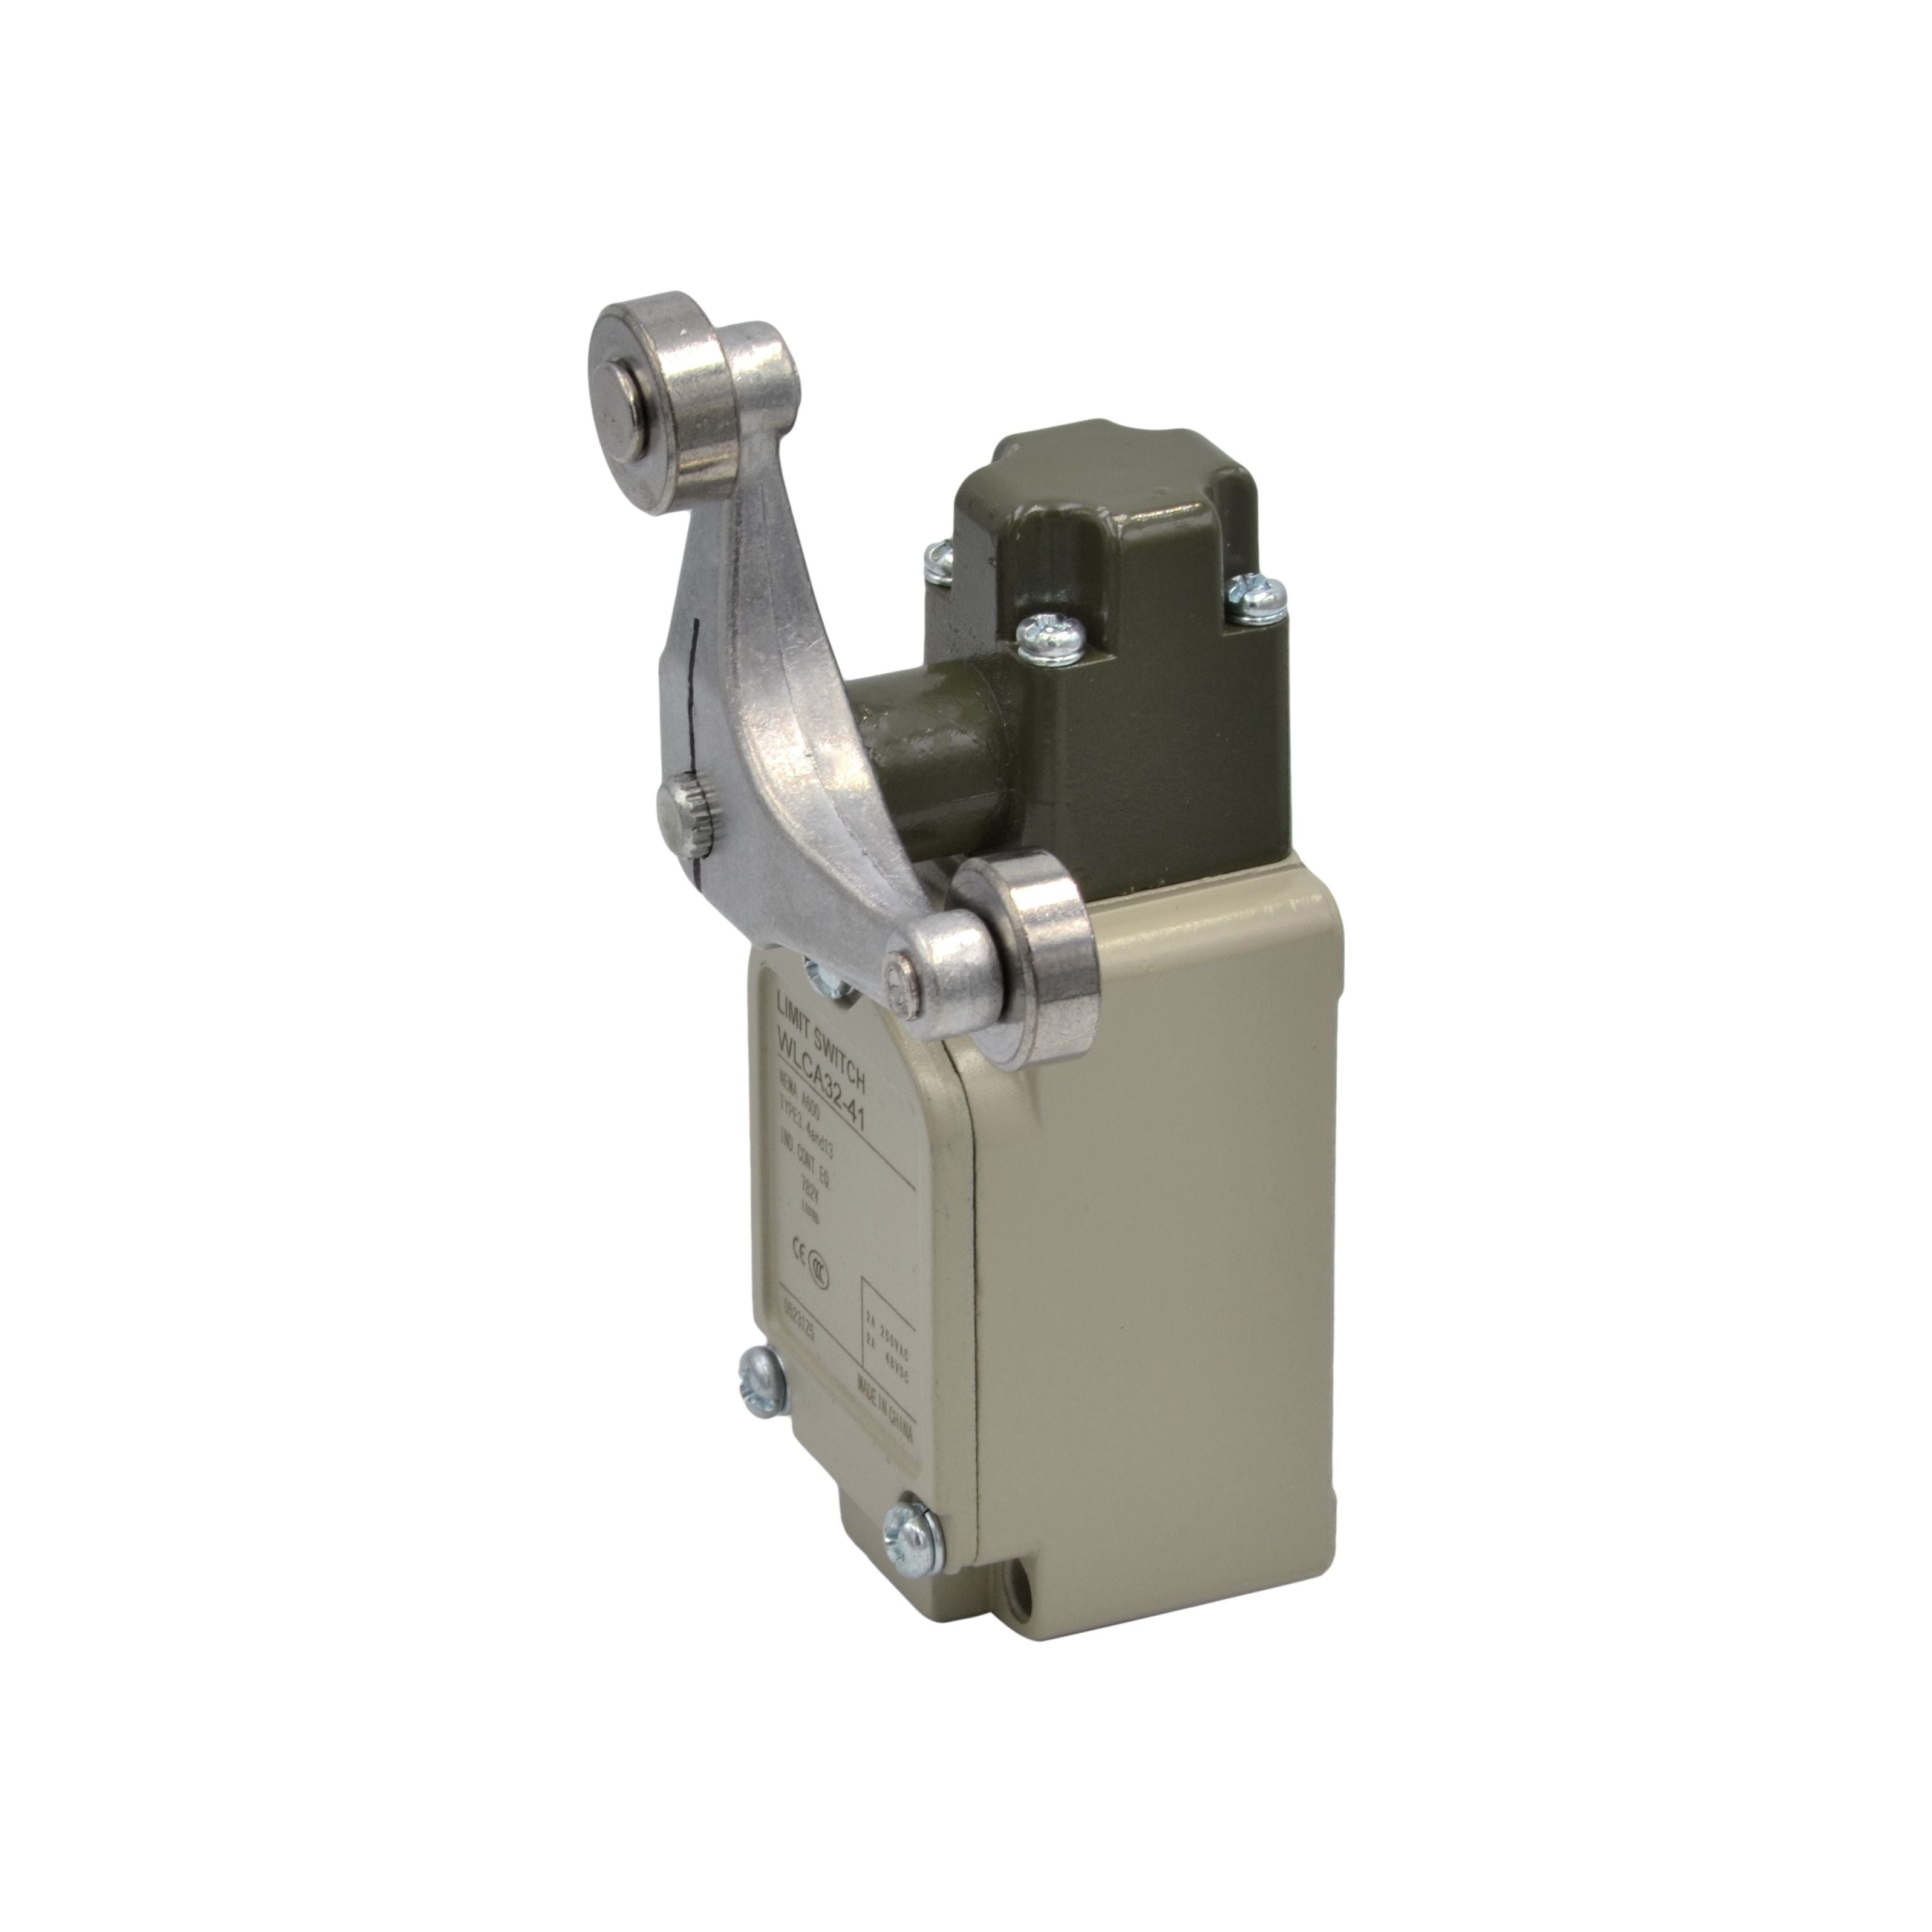 WLCA32-41 Adjustable Stainless Steel Roller Limit Switch